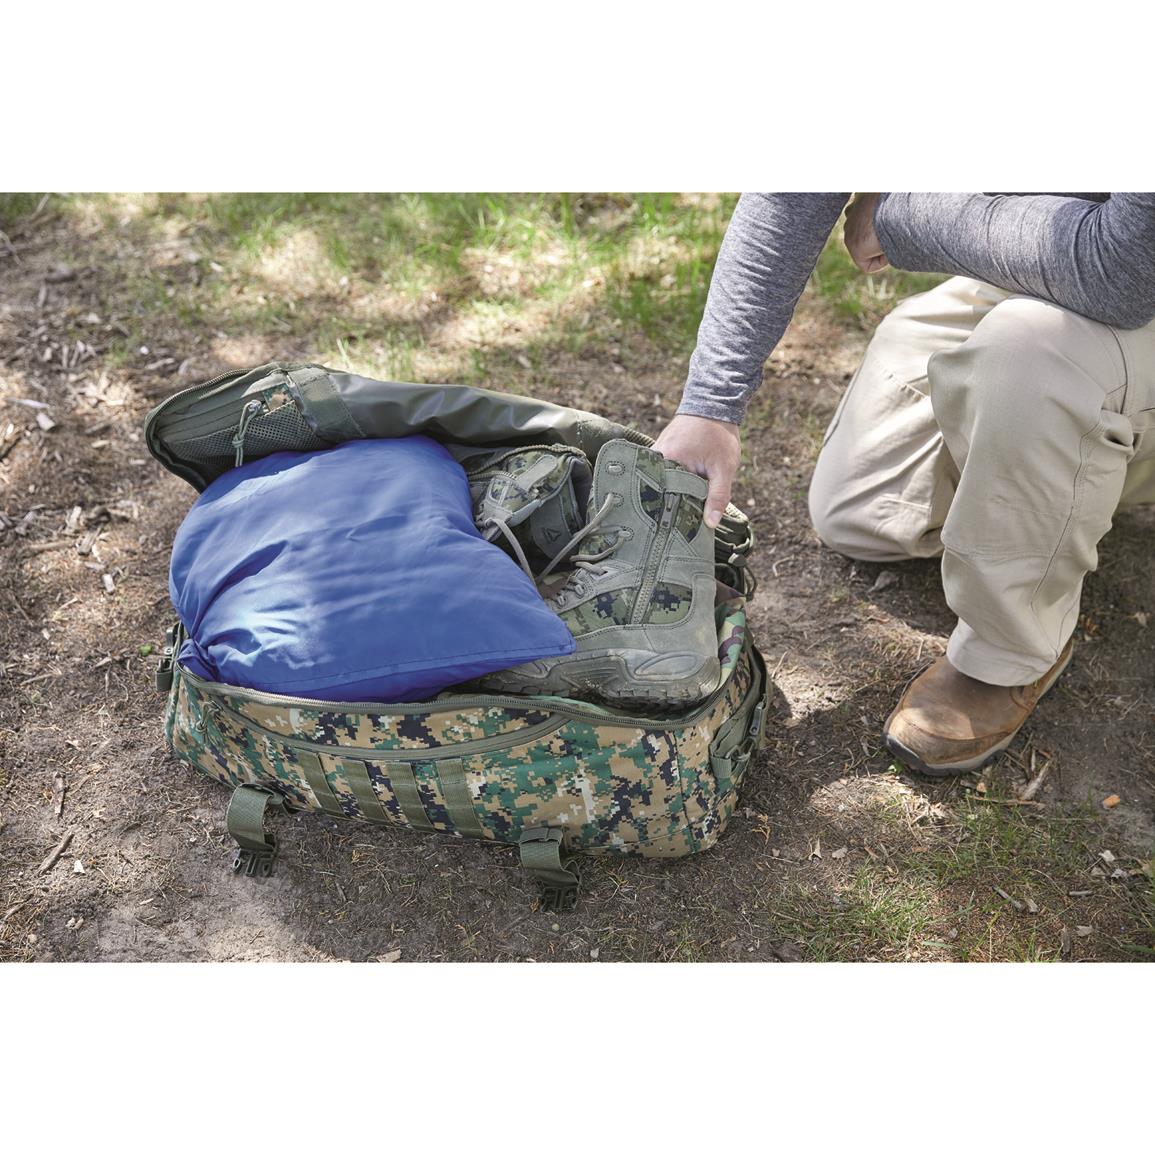 Brooklyn Armed Forces Military Style 1 Person Tent - 720188, Tactical ...